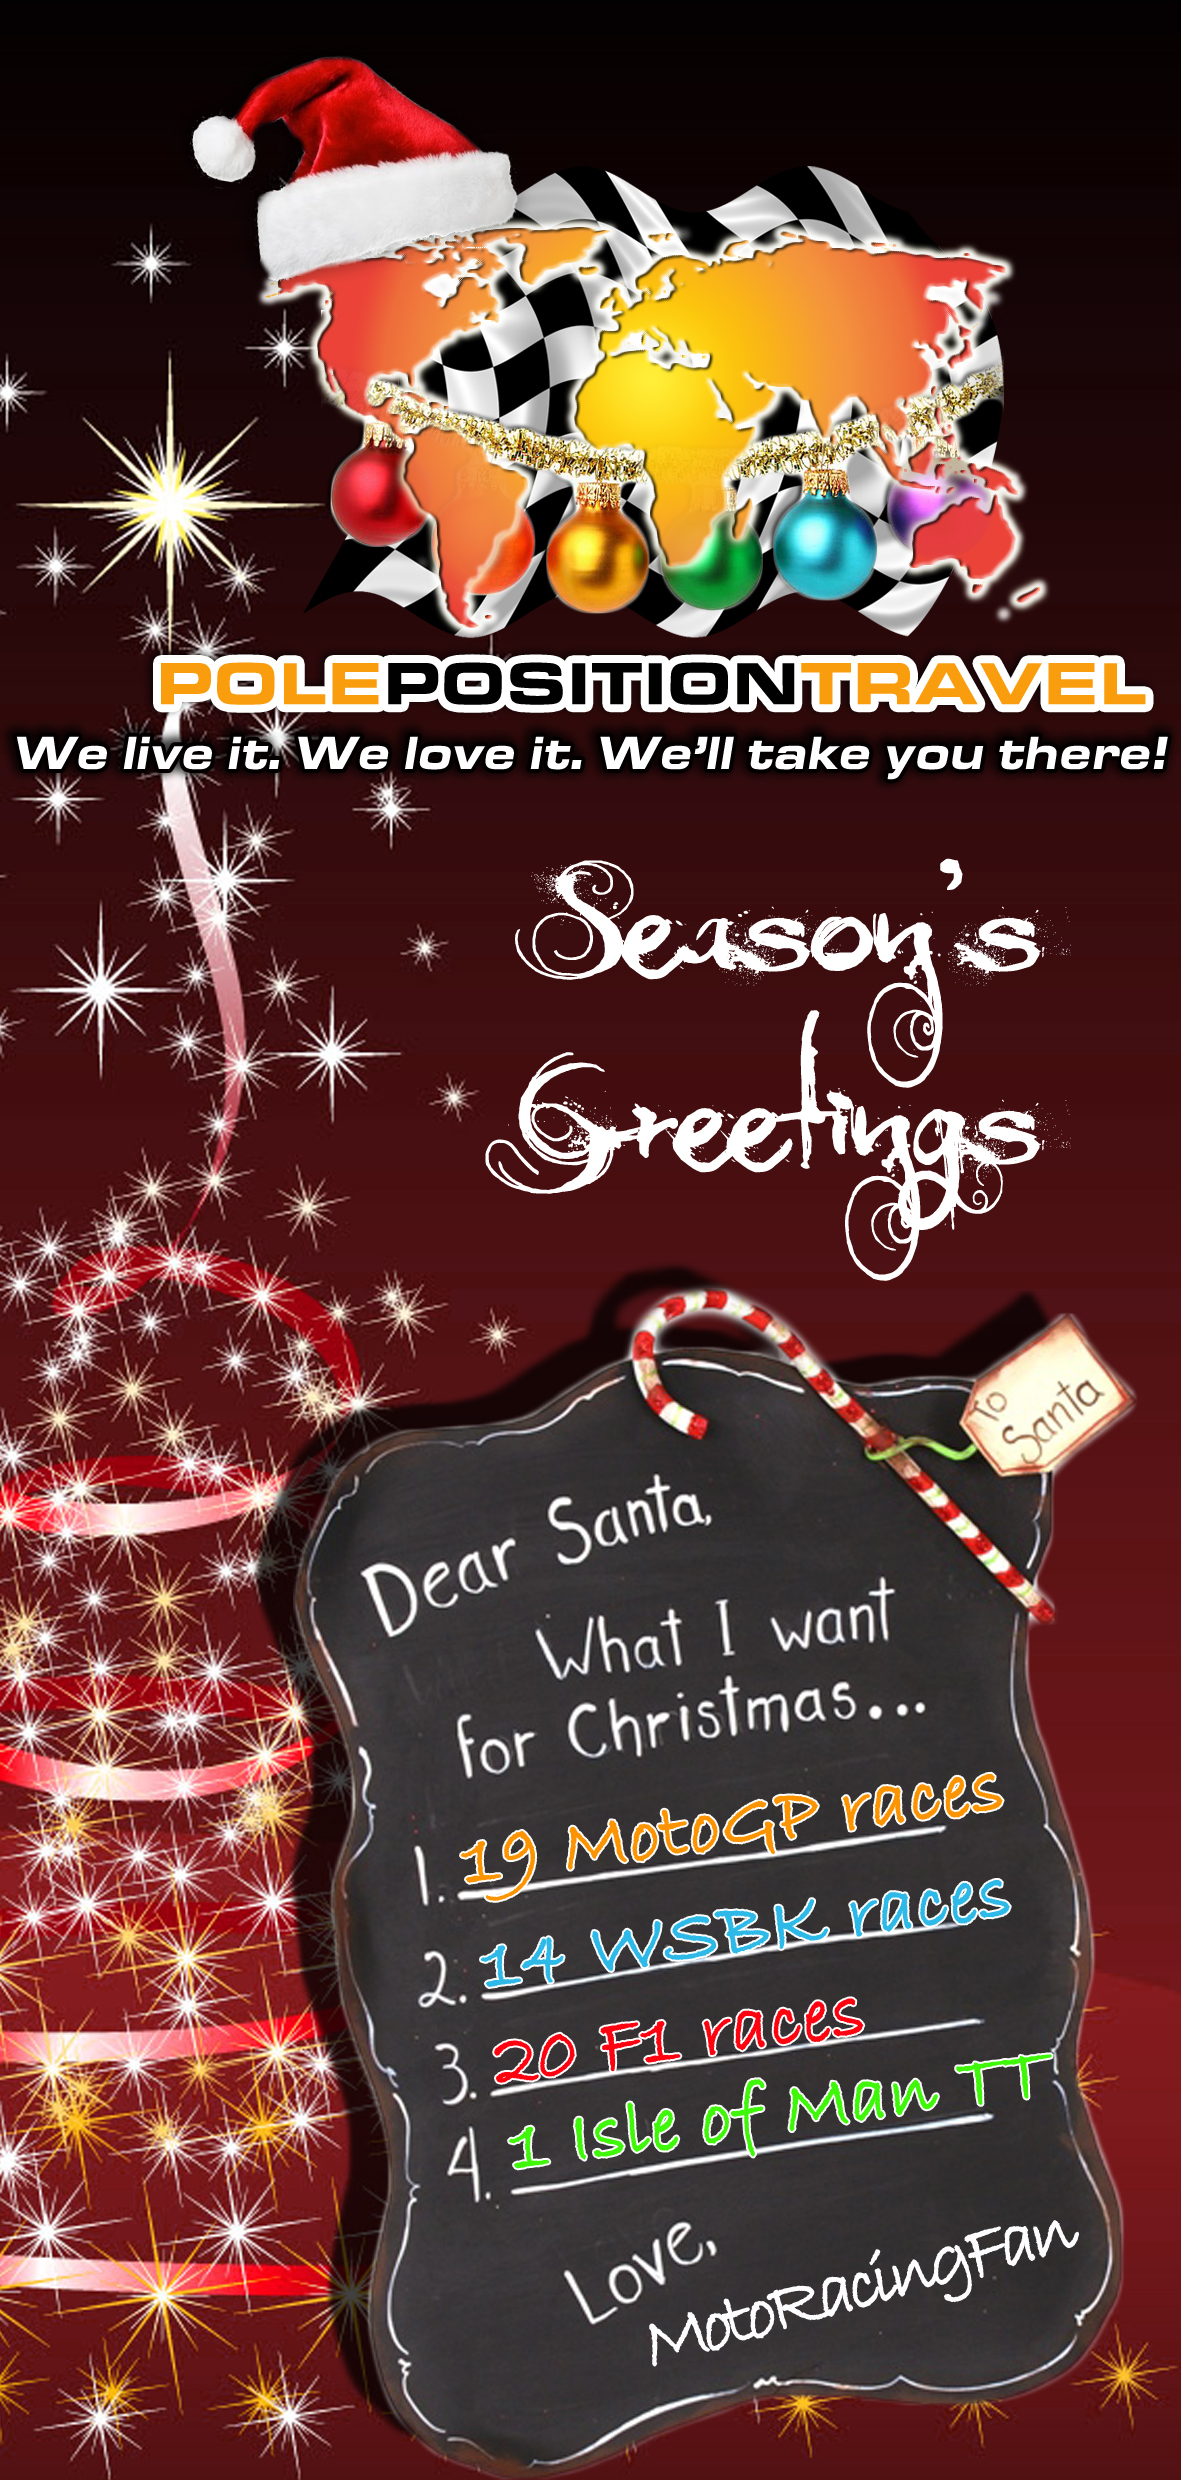 Happy Holidays from Pole Position Travel